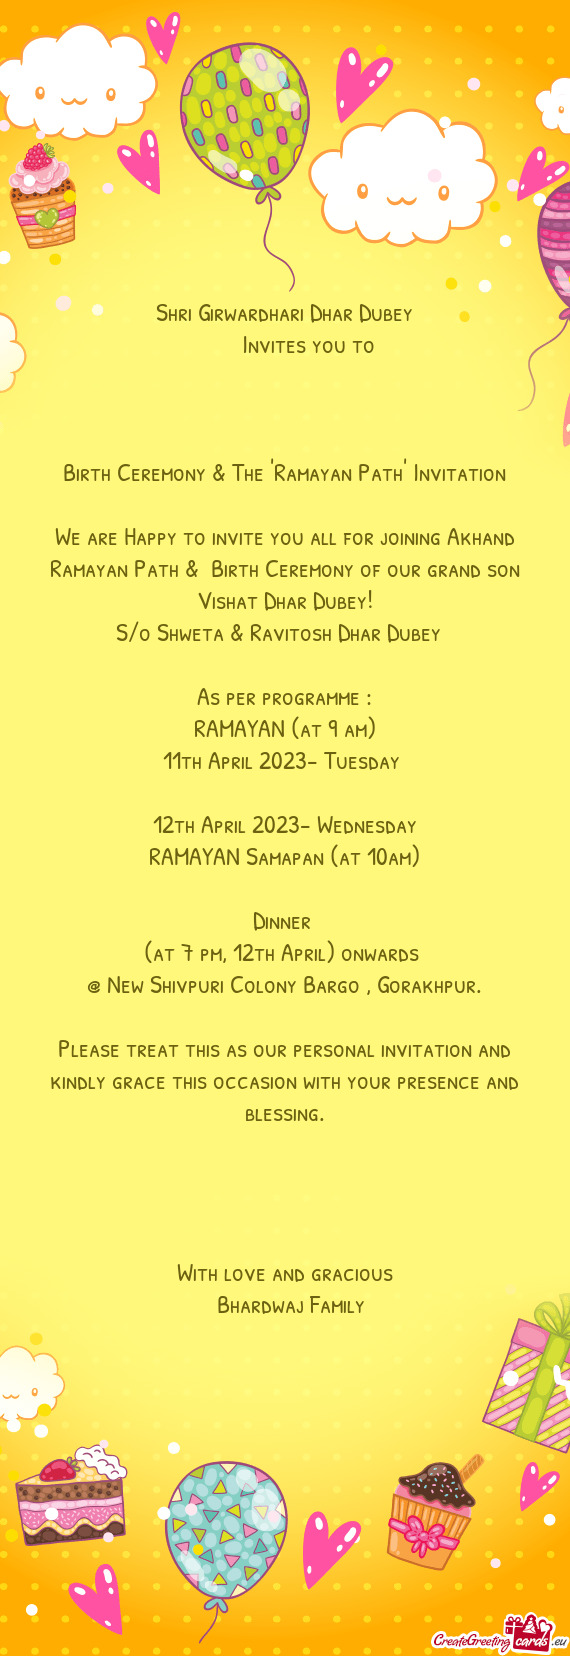 We are Happy to invite you all for joining Akhand Ramayan Path & Birth Ceremony of our grand son